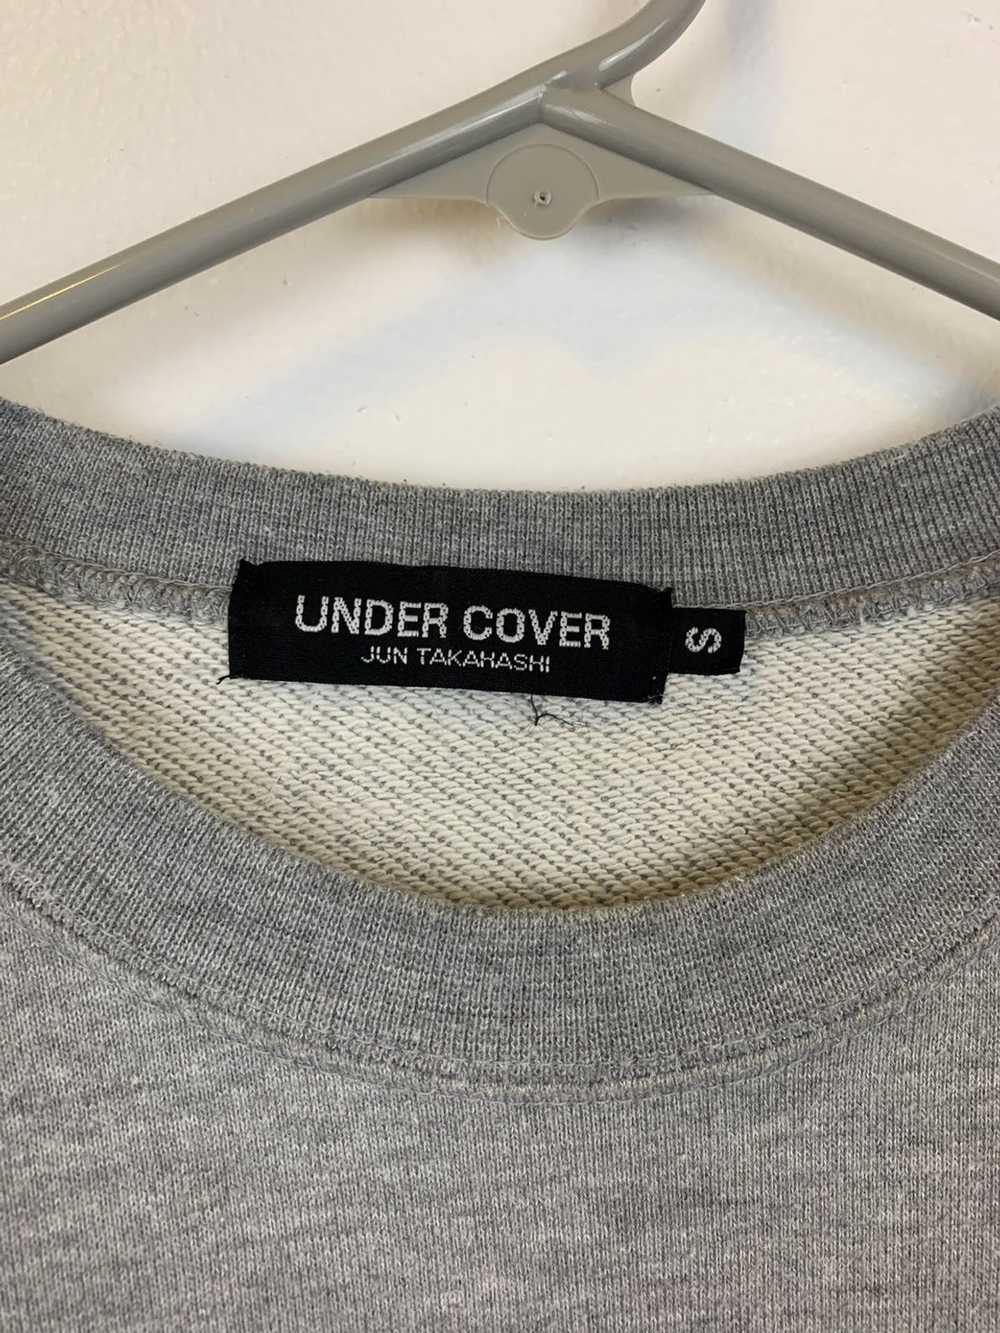 Undercover Undercover bear sweater - image 2